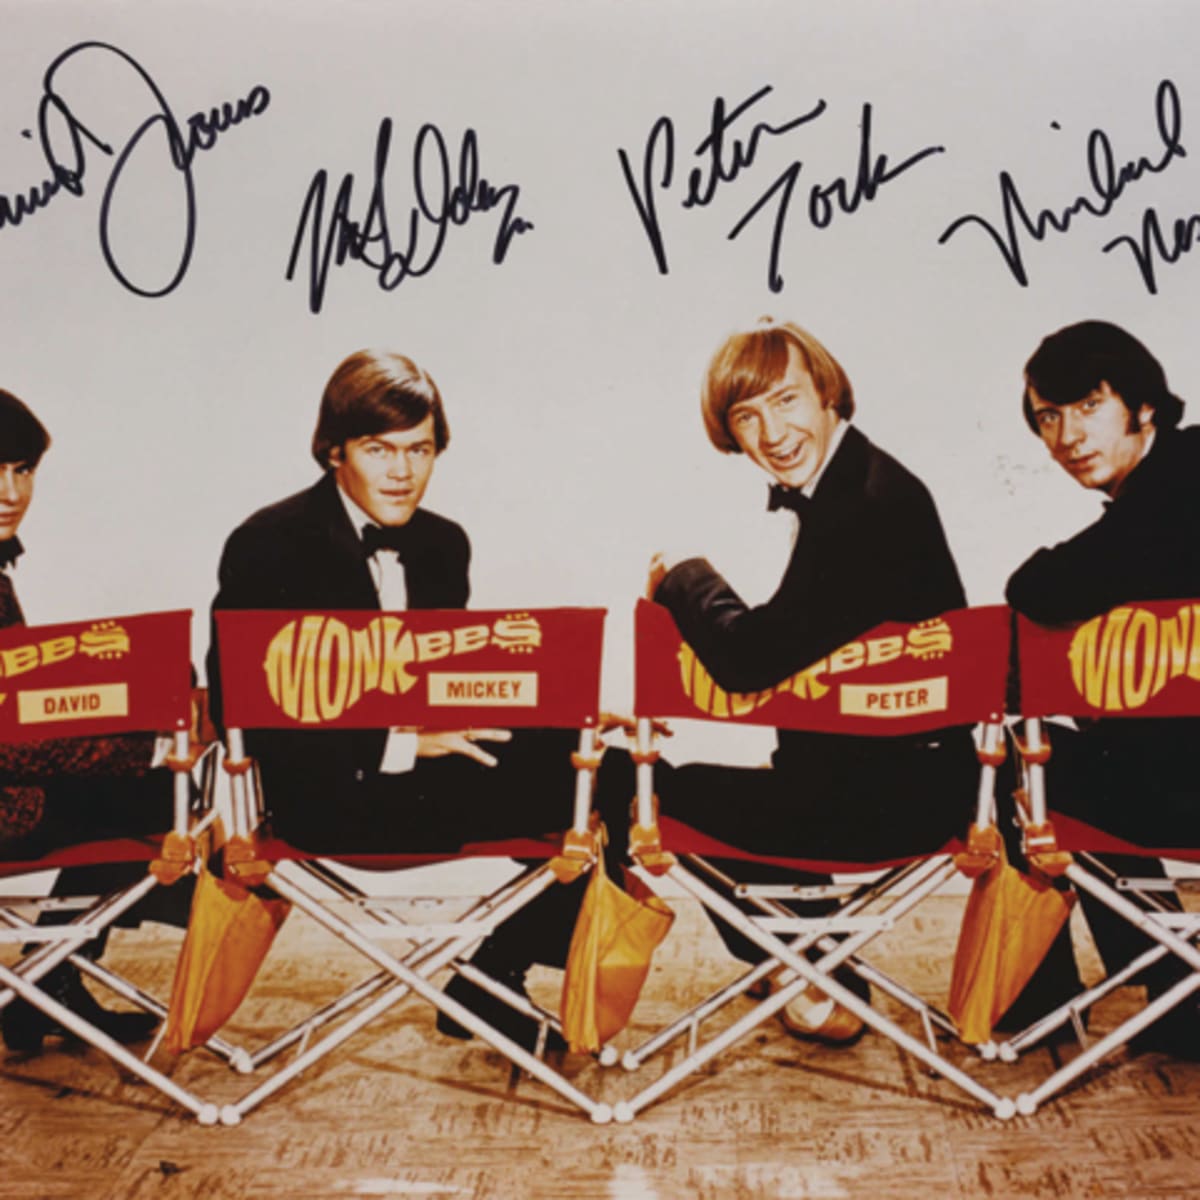 The Monkees 11x17 Mini Poster Micky Dolenz close up 